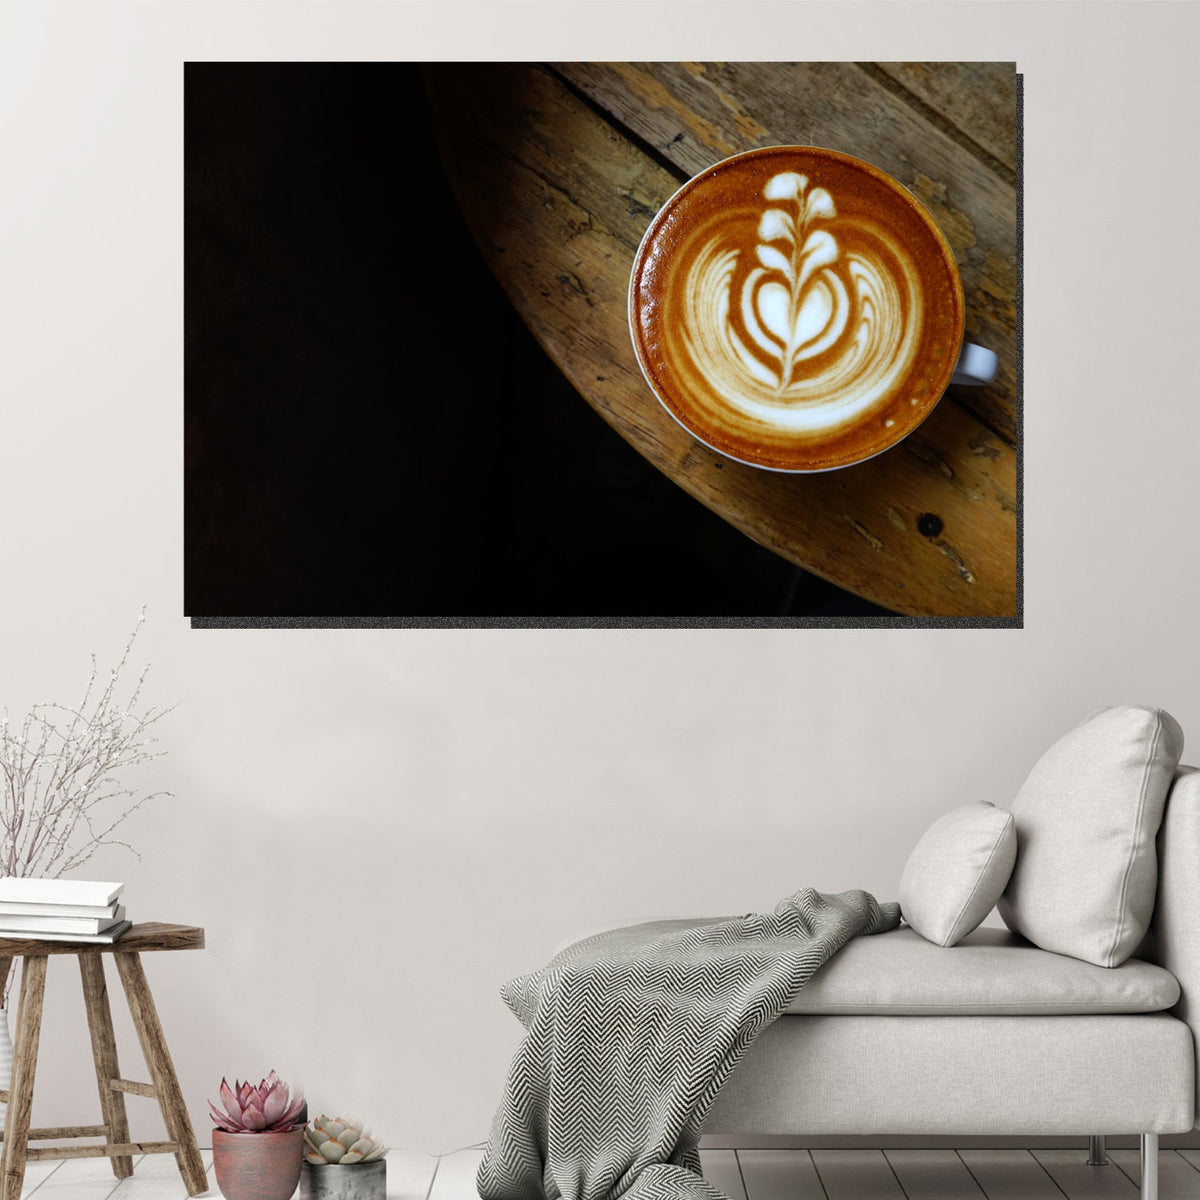 https://cdn.shopify.com/s/files/1/0387/9986/8044/products/CoffeeBreakCanvasArtprintStretched-2.jpg